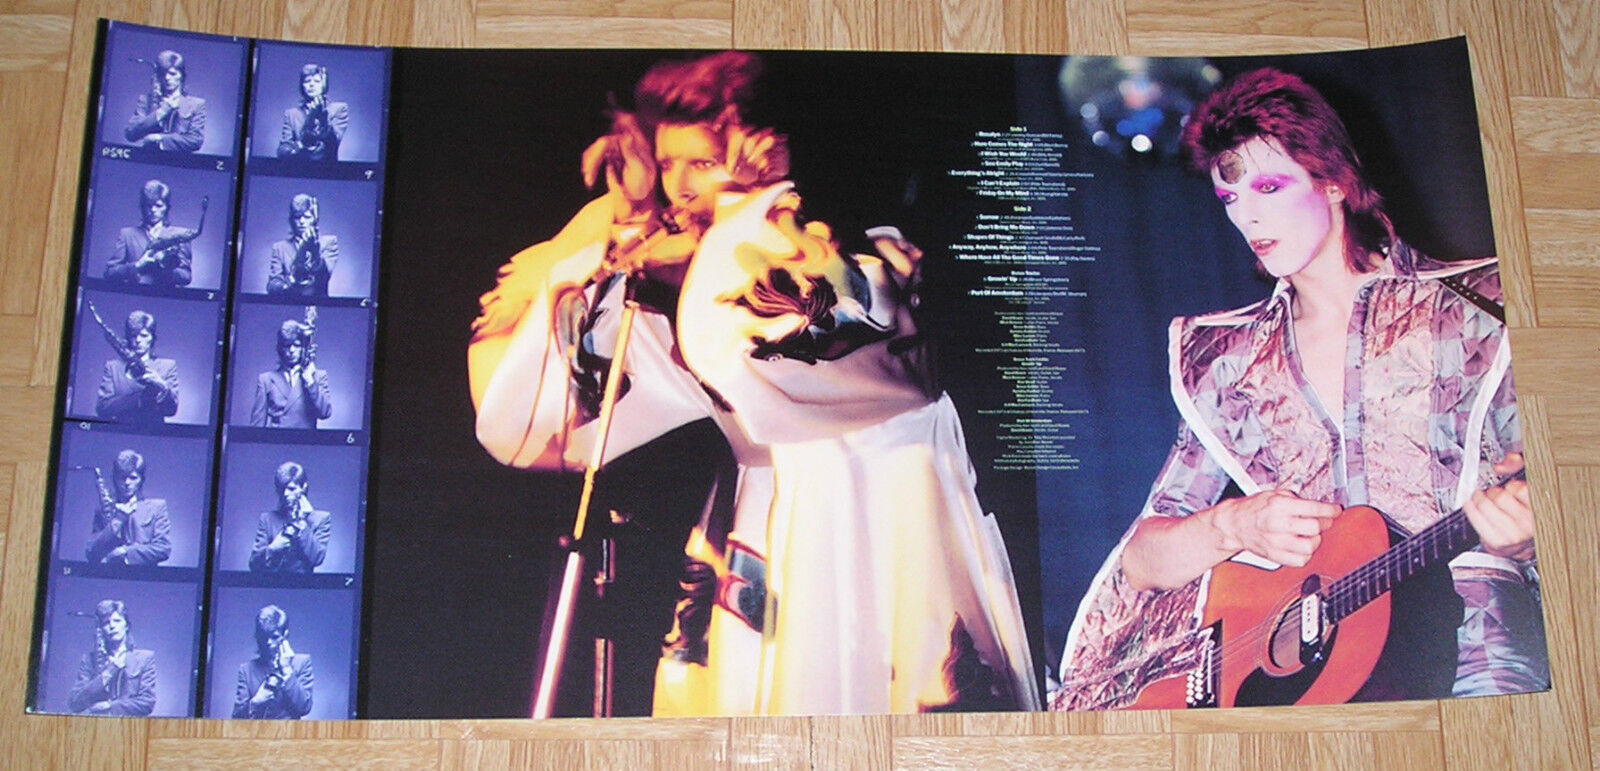 David Bowie Album Indianapolis Mall Lyrics Promo Poster ears rabbit Today's only 24x12